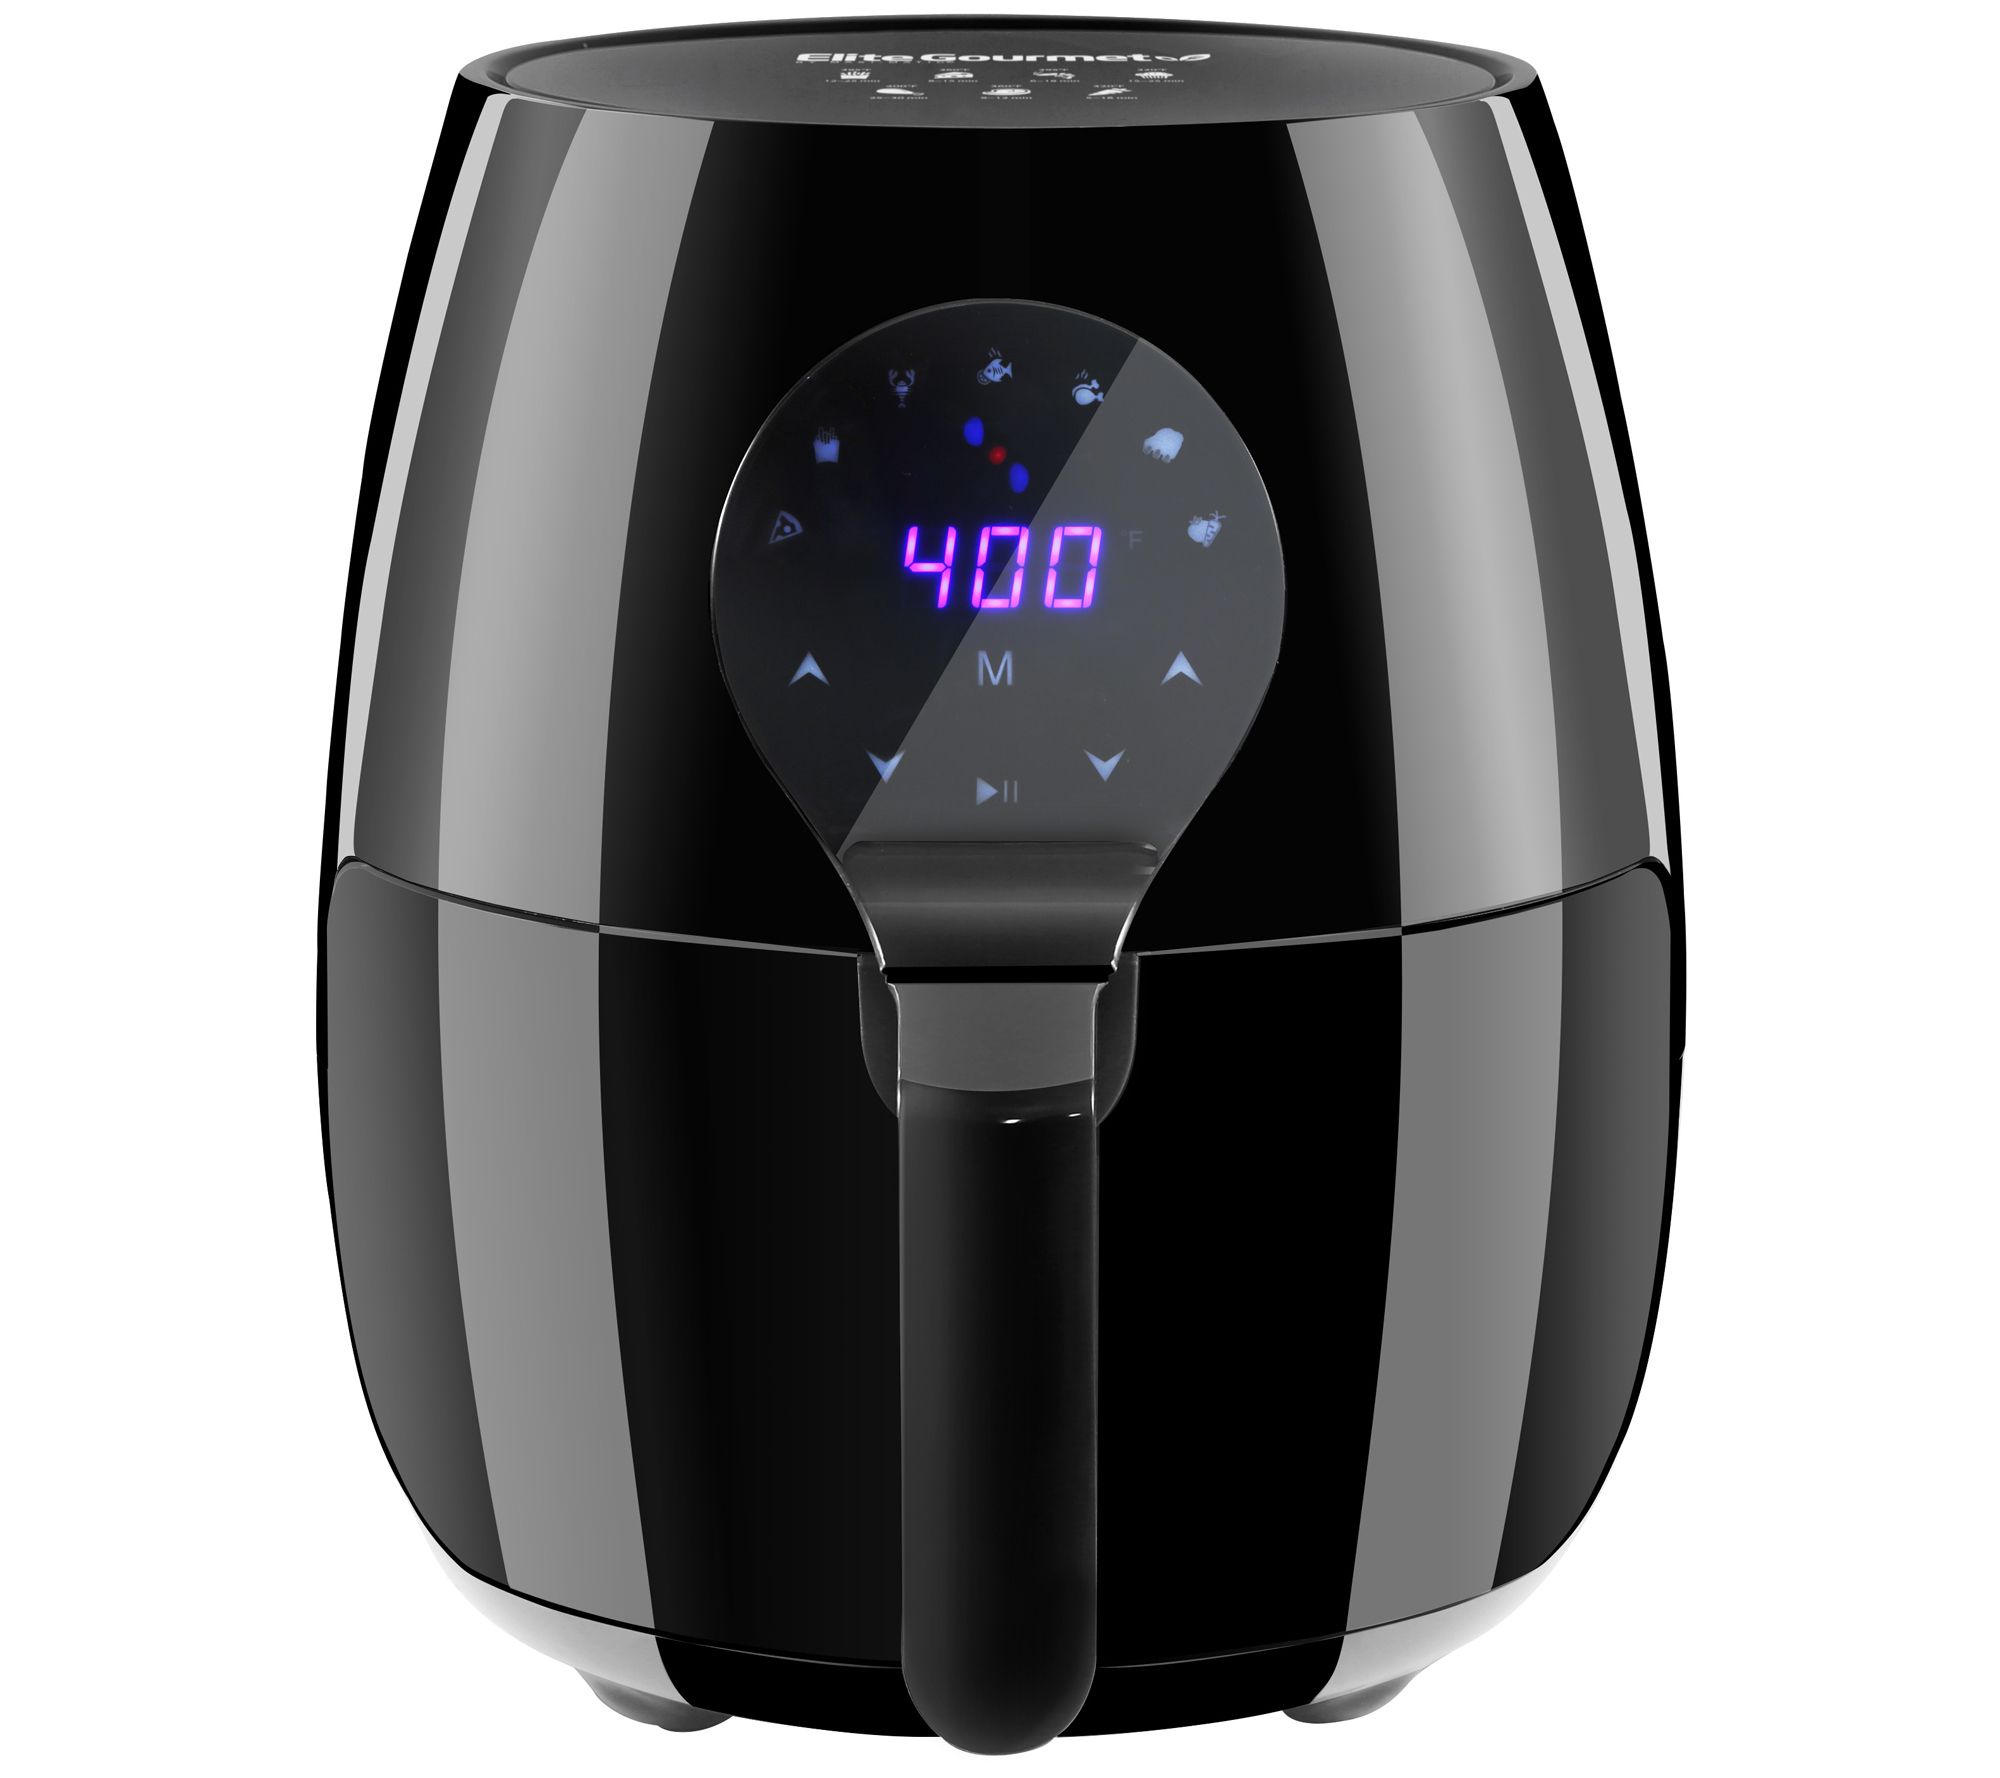 PowerXL 10qt 8-in-1 1700W Dual Basket Air Fryer For Only $79.98 at QVC